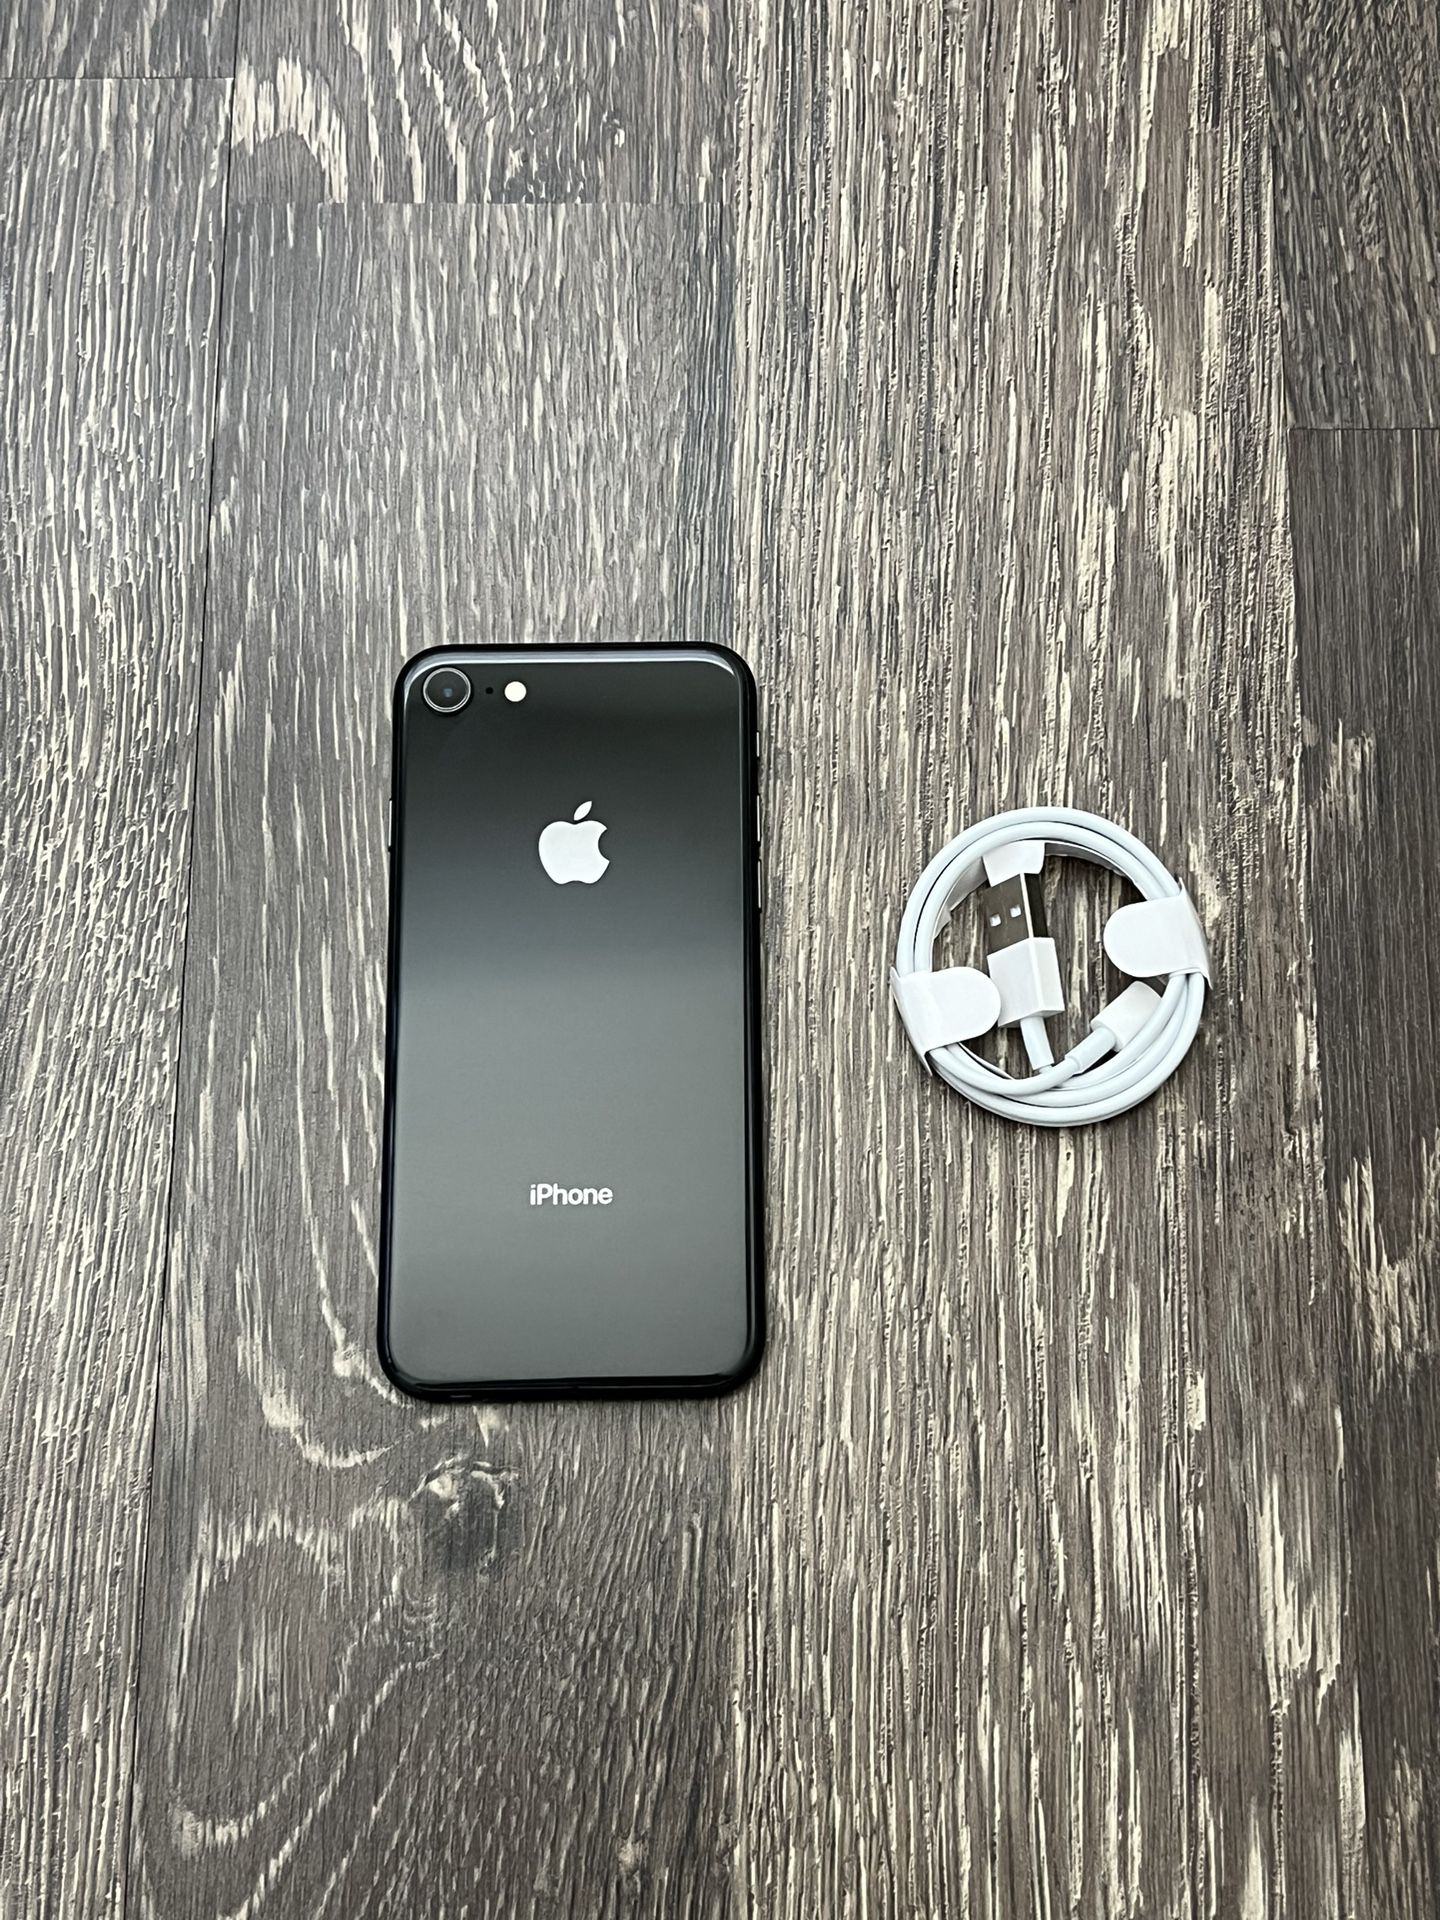 iPhone 8 UNLOCKED FOR ANY CARRIER!